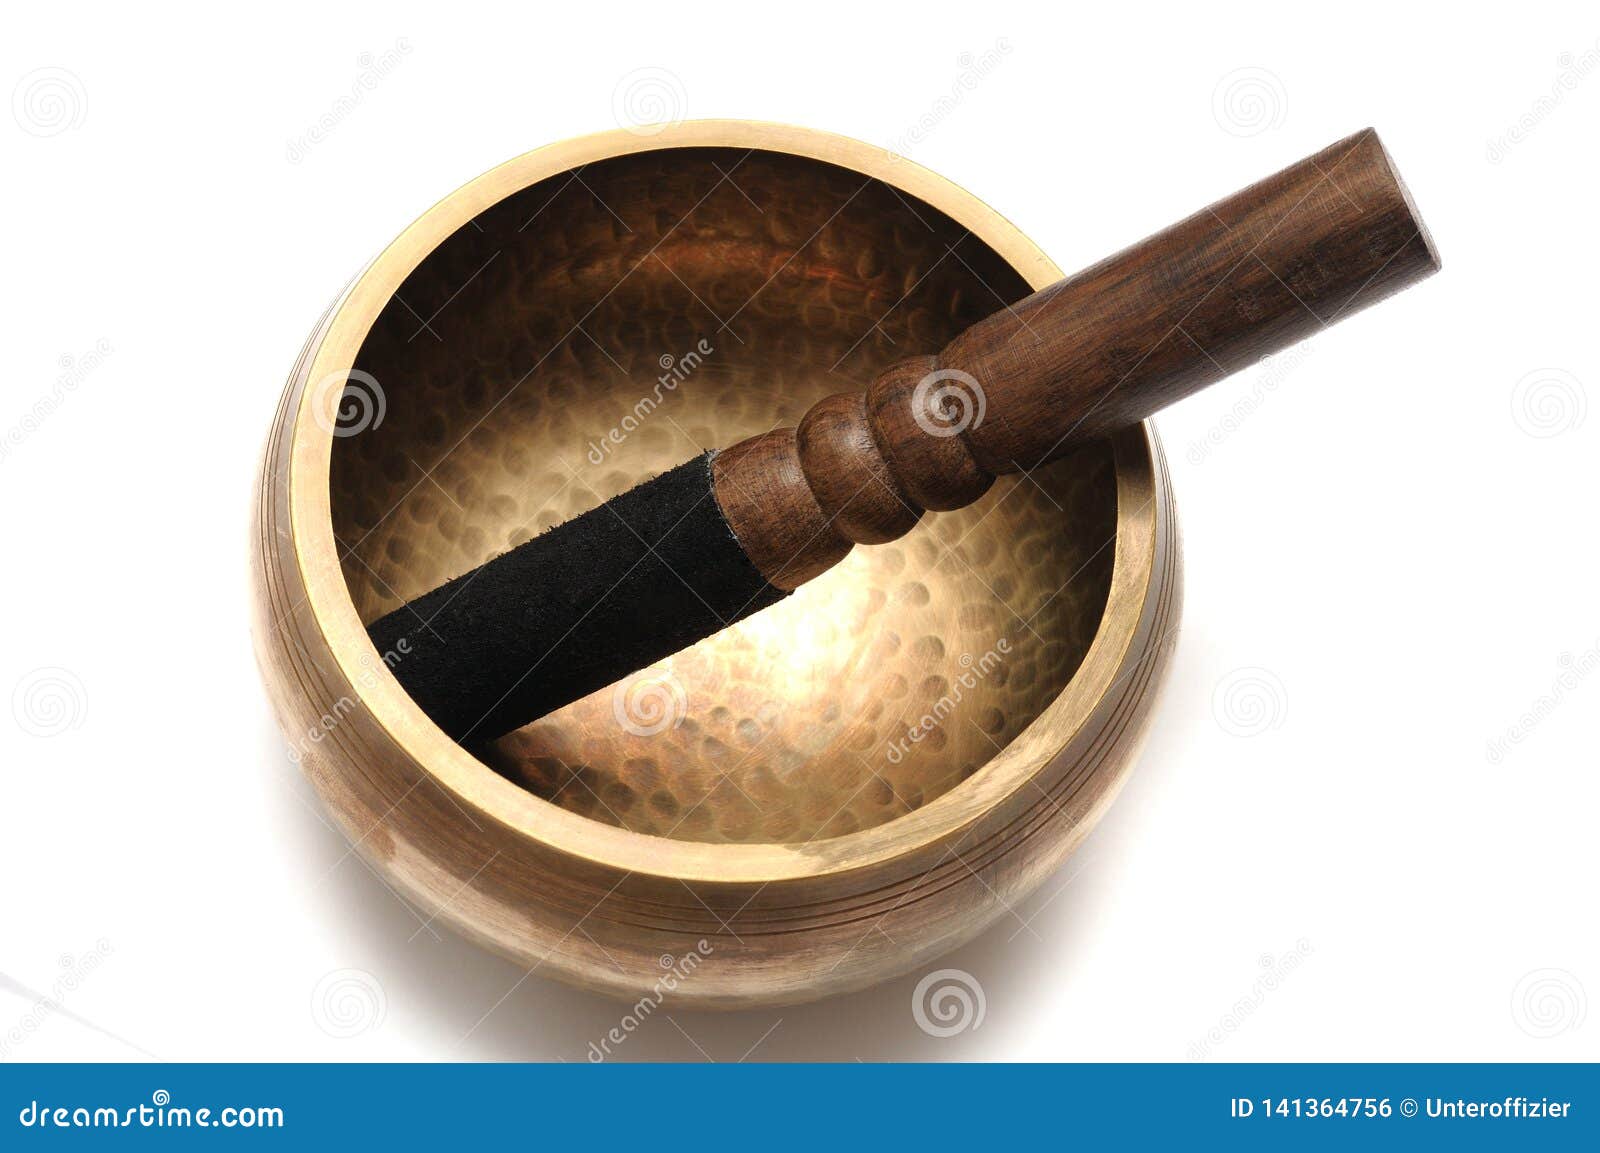 a tibetan singing bowl with a wooden striker